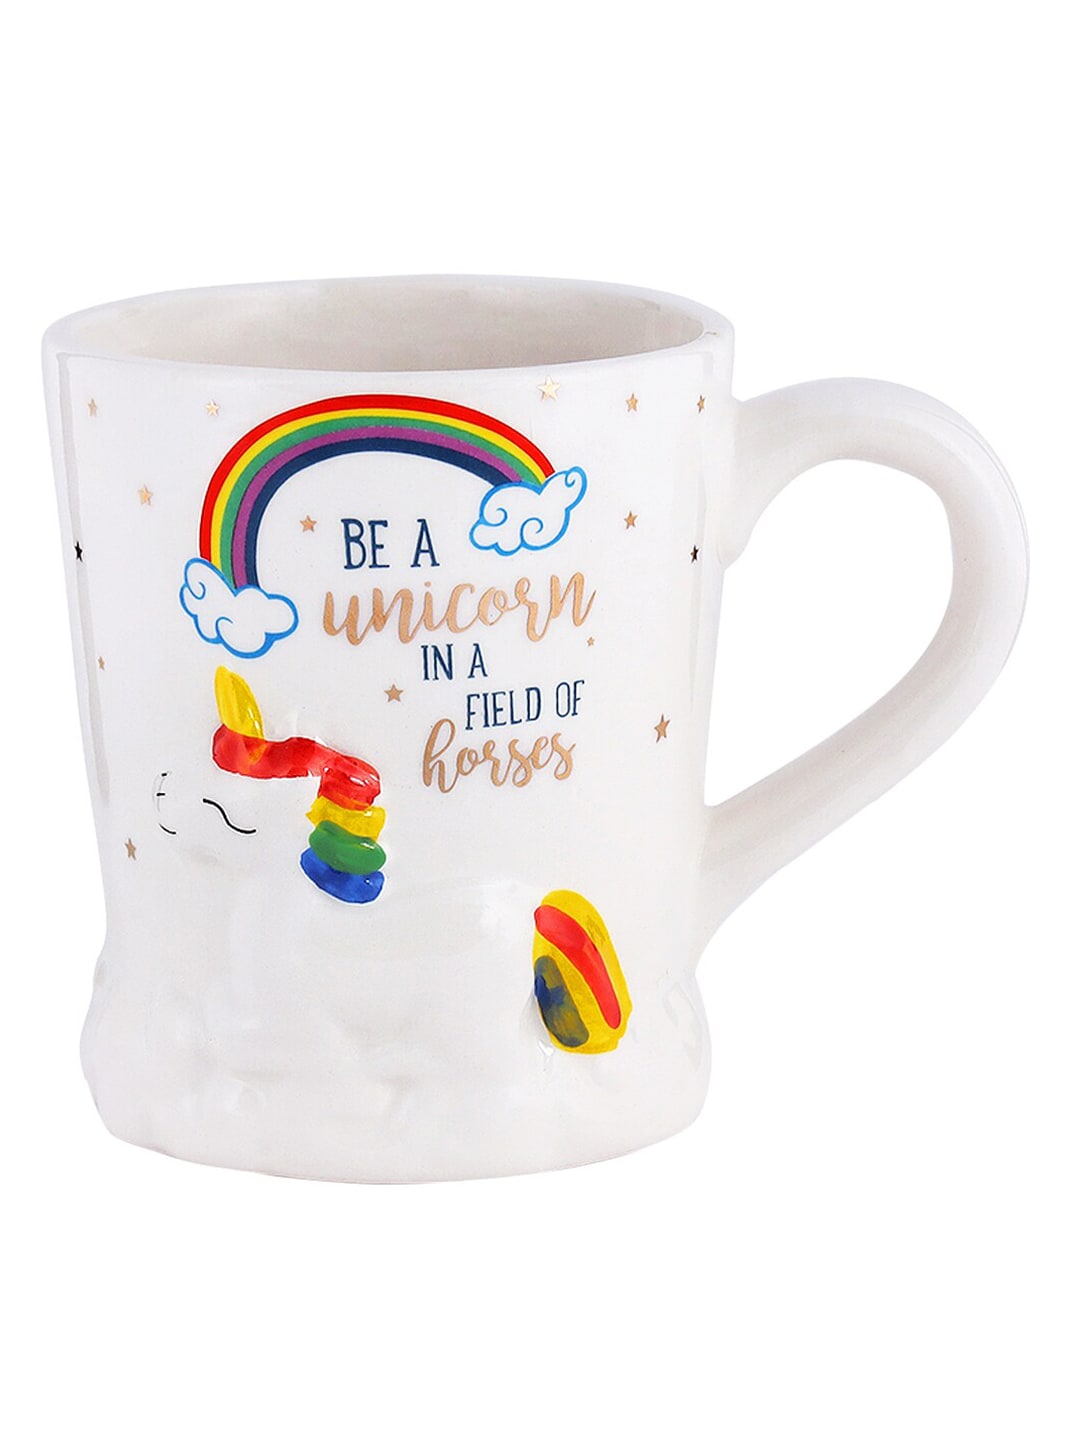 BonZeaL White & Yellow Text or Slogans Printed Ceramic Glossy Mugs Price in India